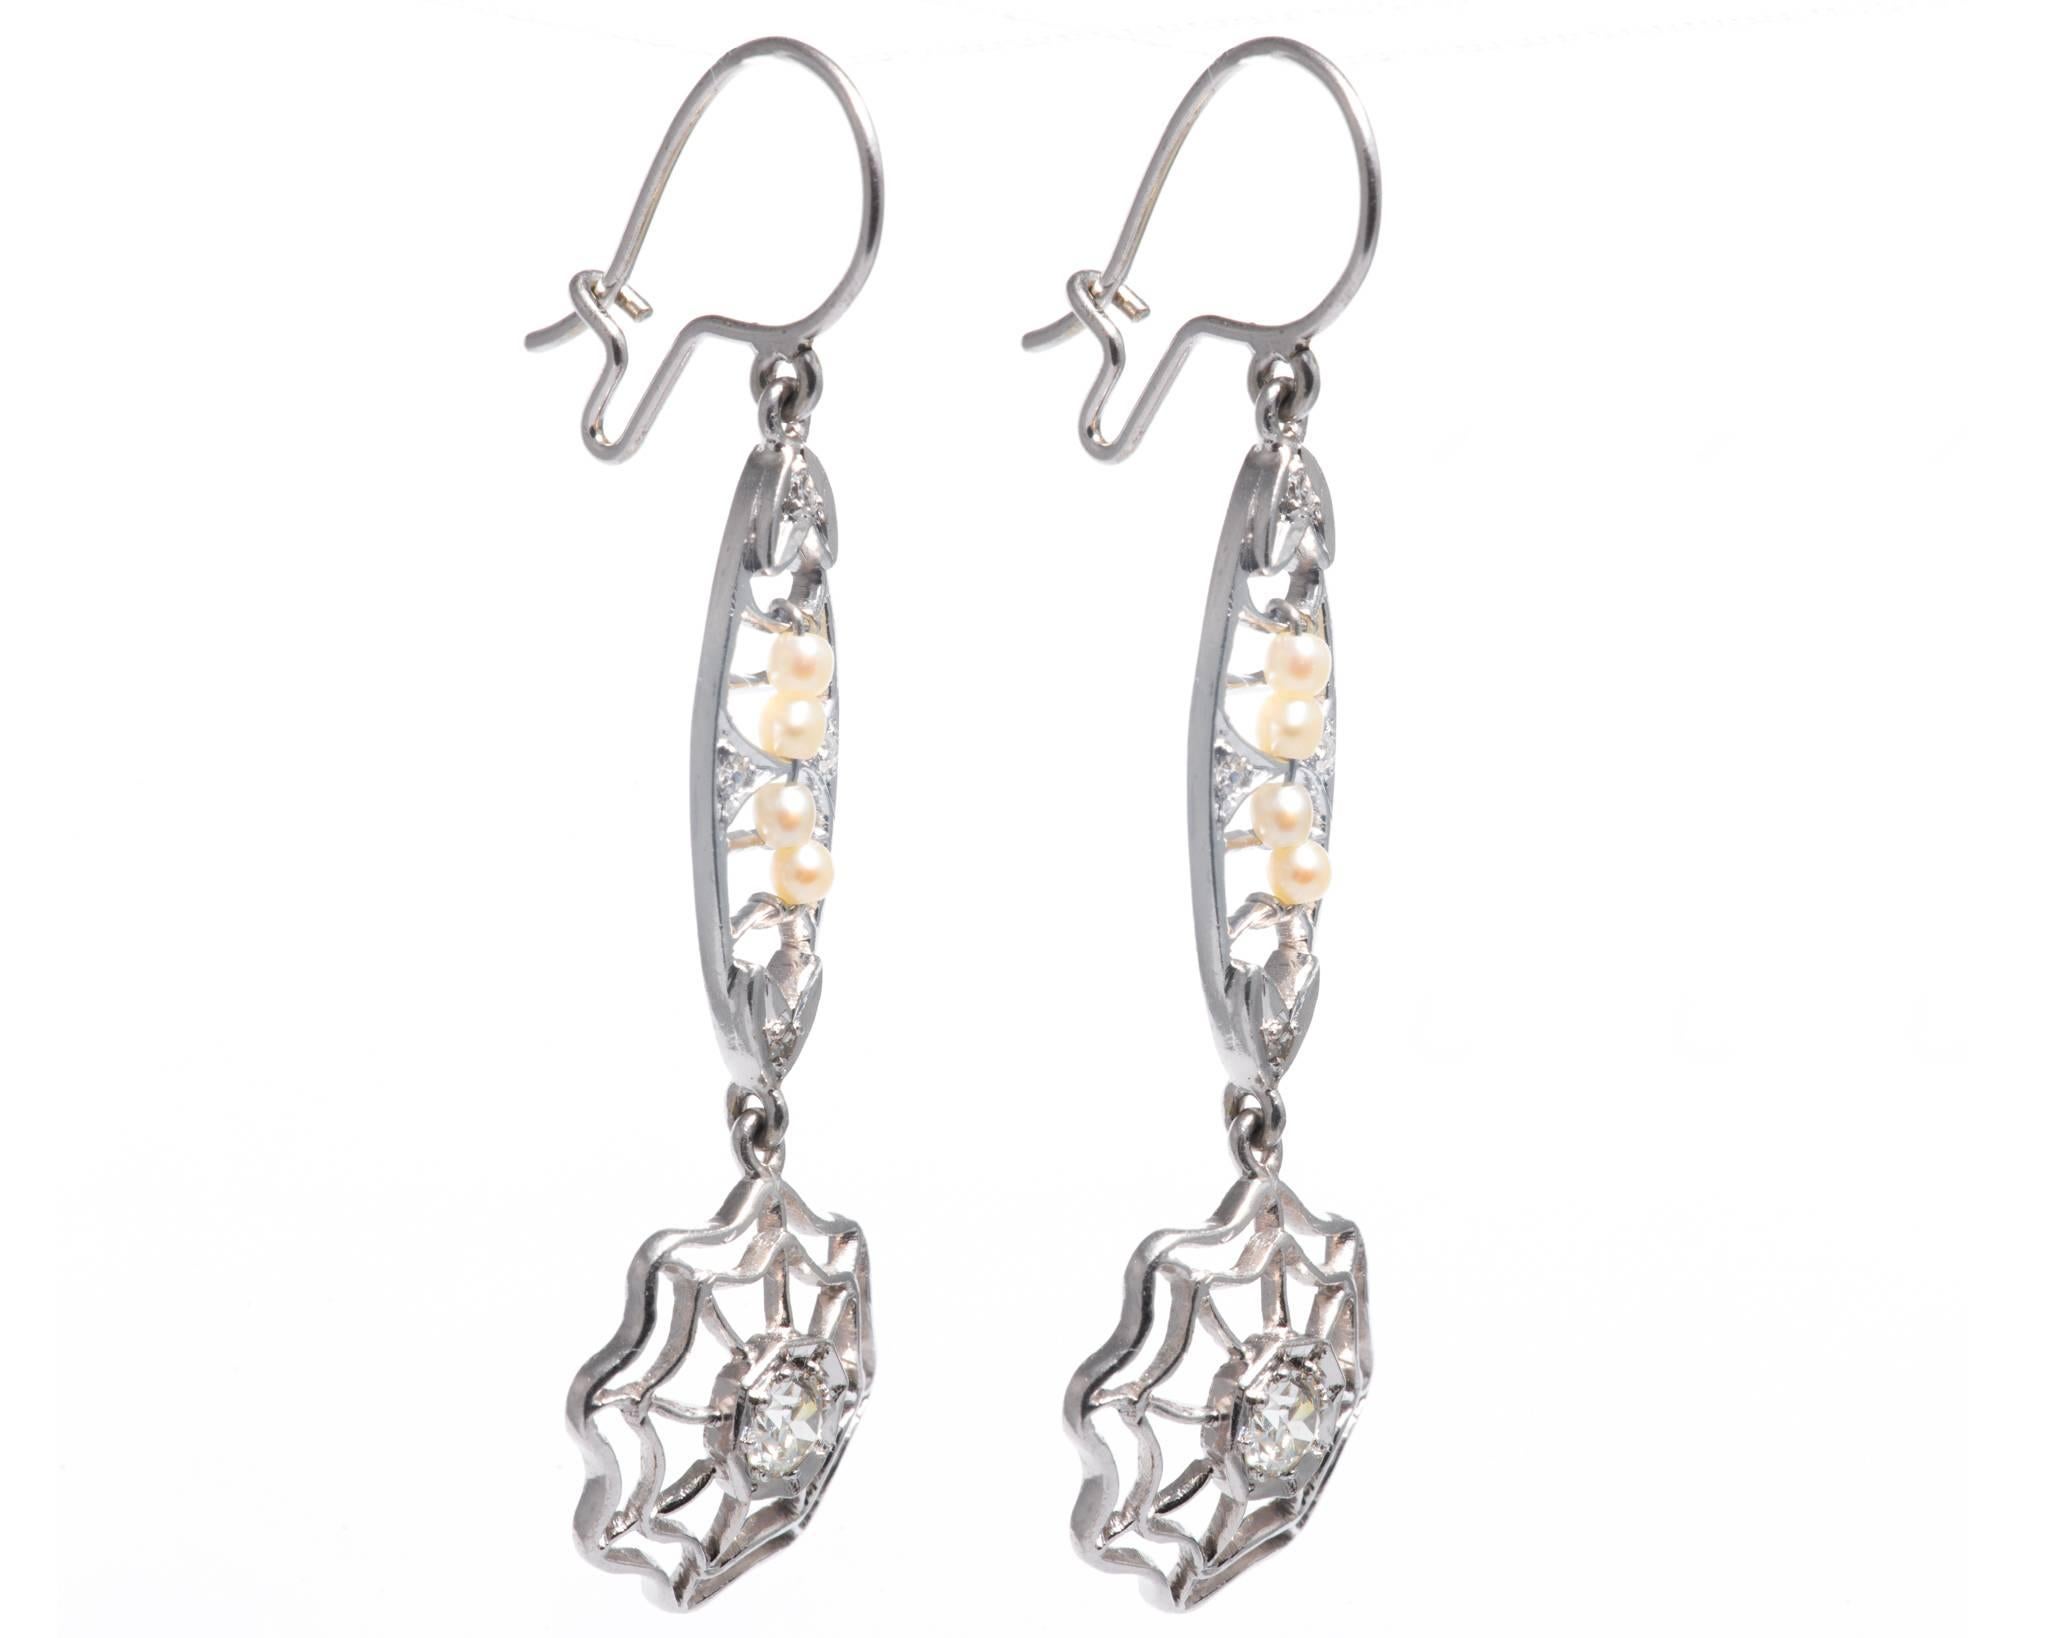 A pair of art deco period dreamcatcher style earrings in platinum. Set with sparkling diamonds and natural pearls these earrings feature beautiful handmade wire filigree work throughout.

Crafted as a pair of dreamcatchesrs, these wire backing